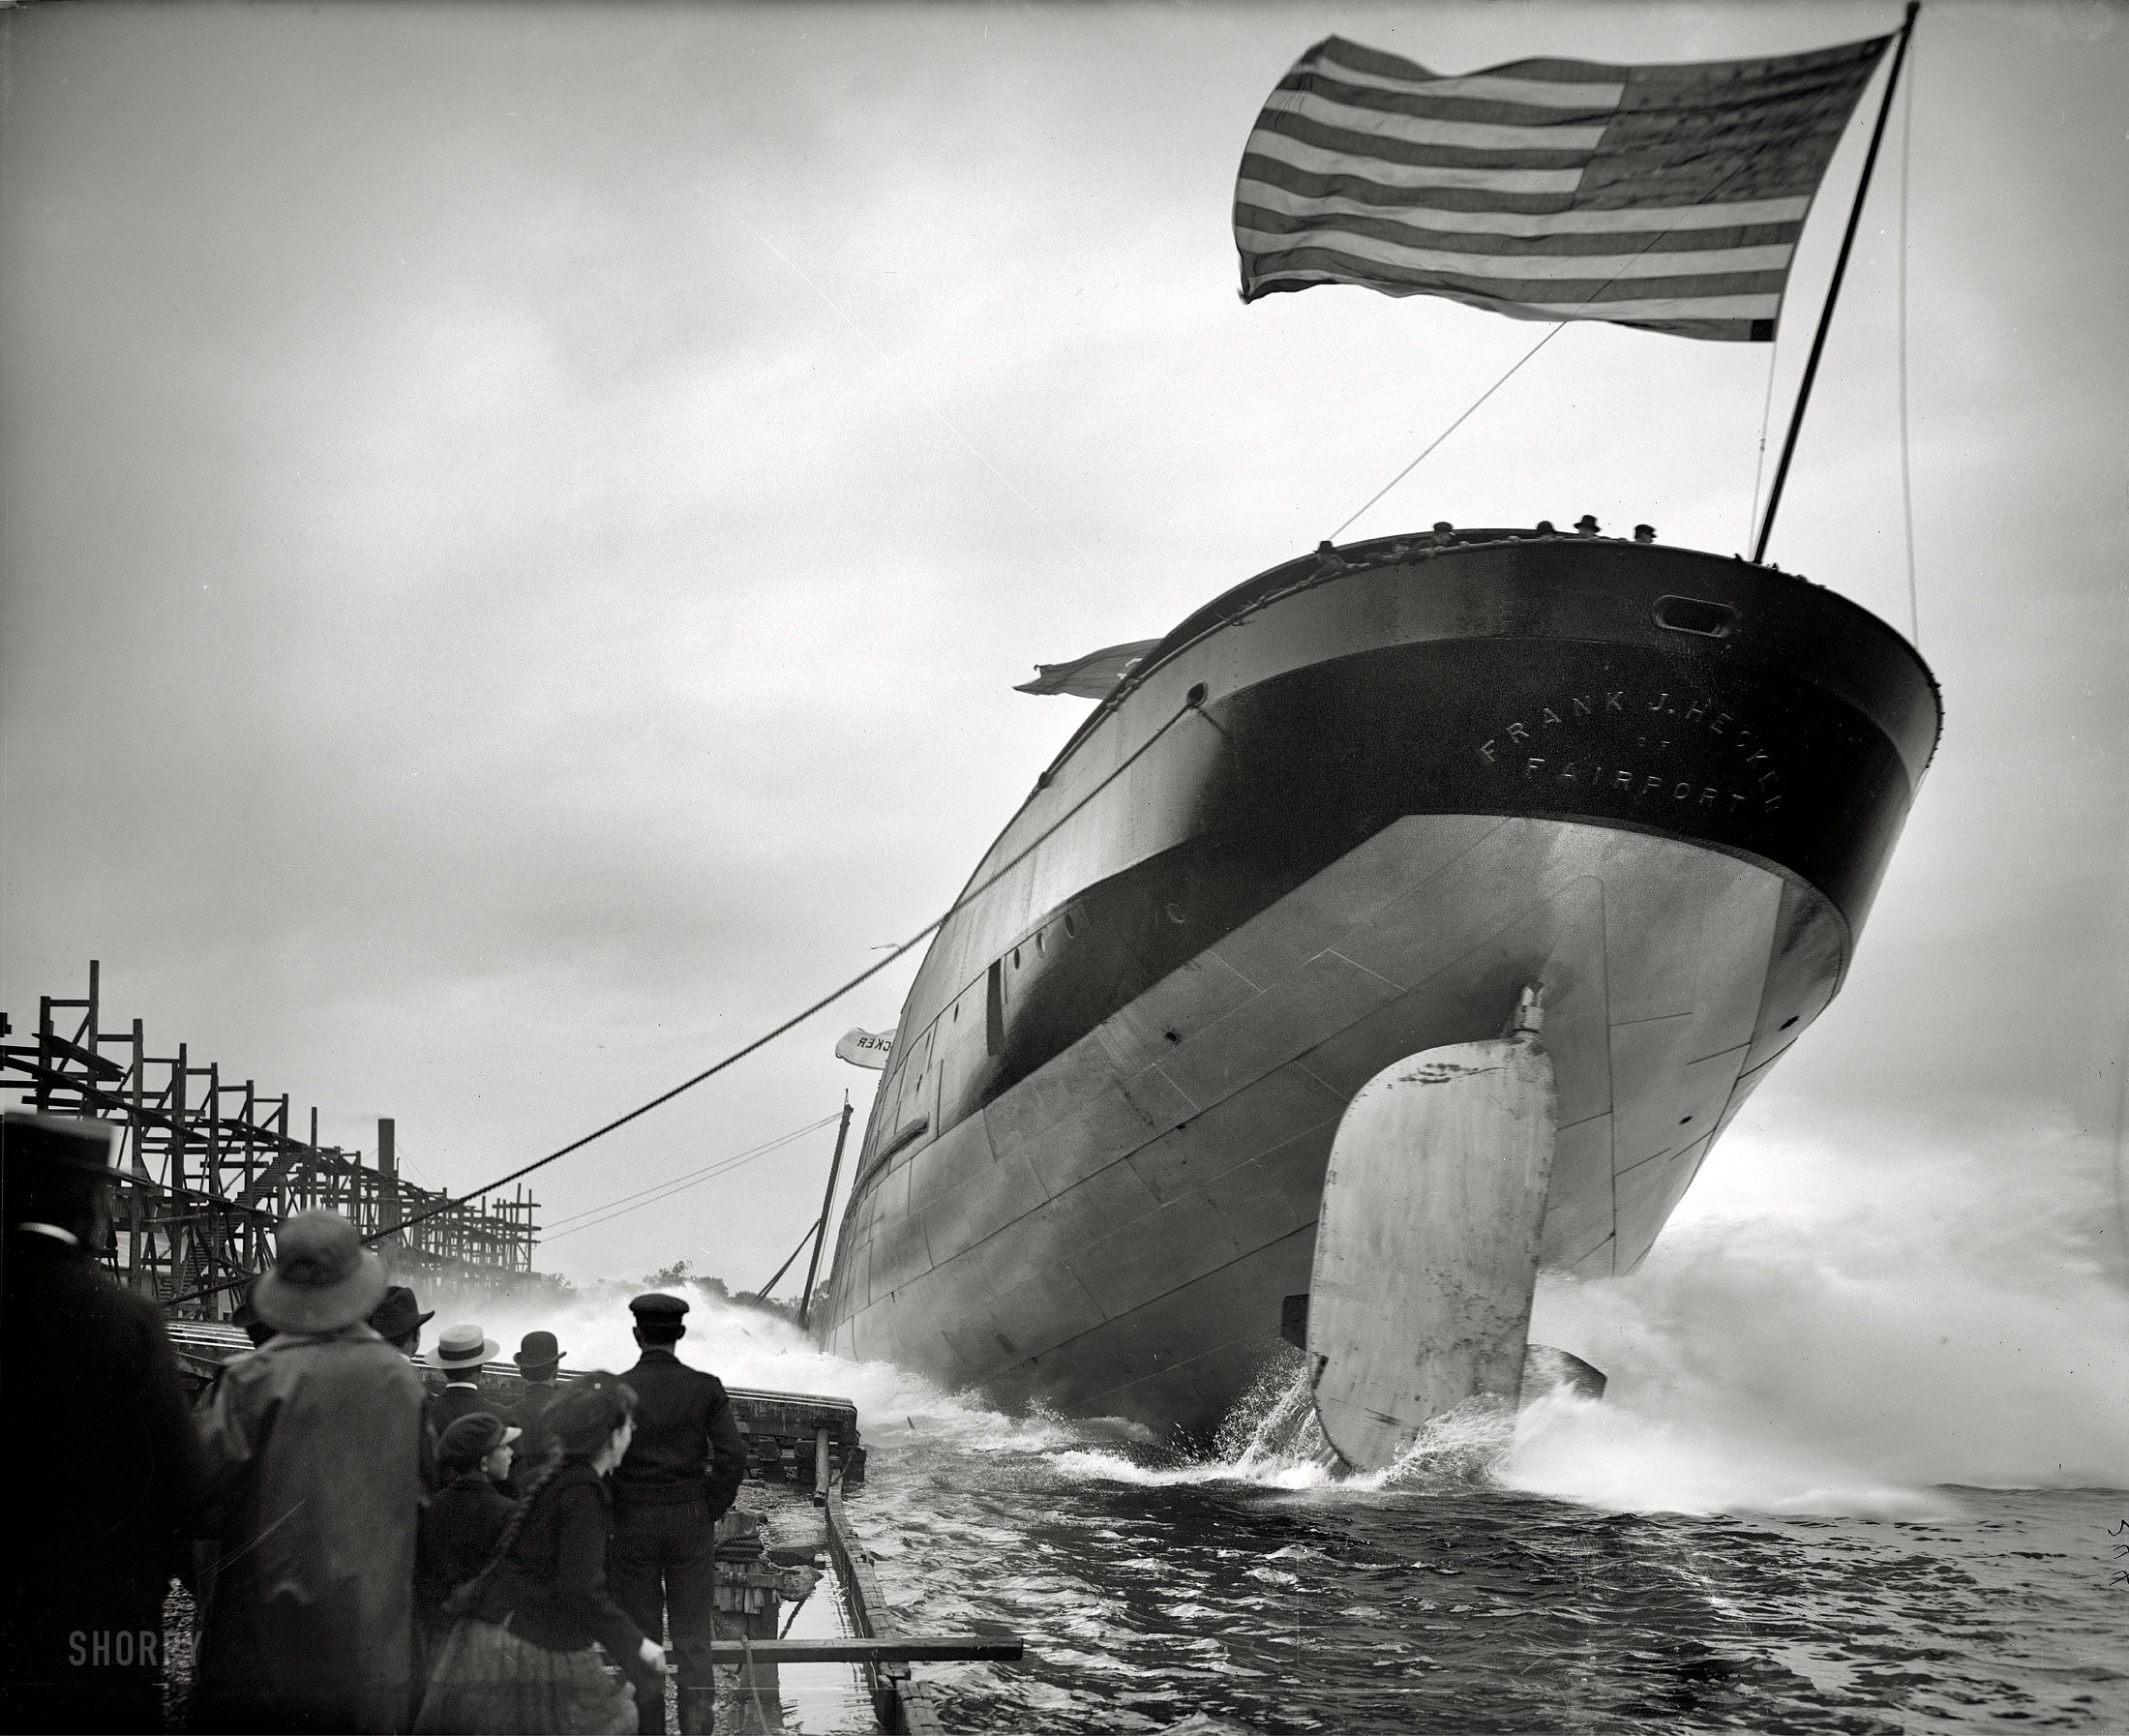 September 2, 1905. St. Clair, Michigan. "Launch of steamer Frank J. Hecker." 8x10 inch dry plate glass negative, Detroit Publishing Company. View full size.